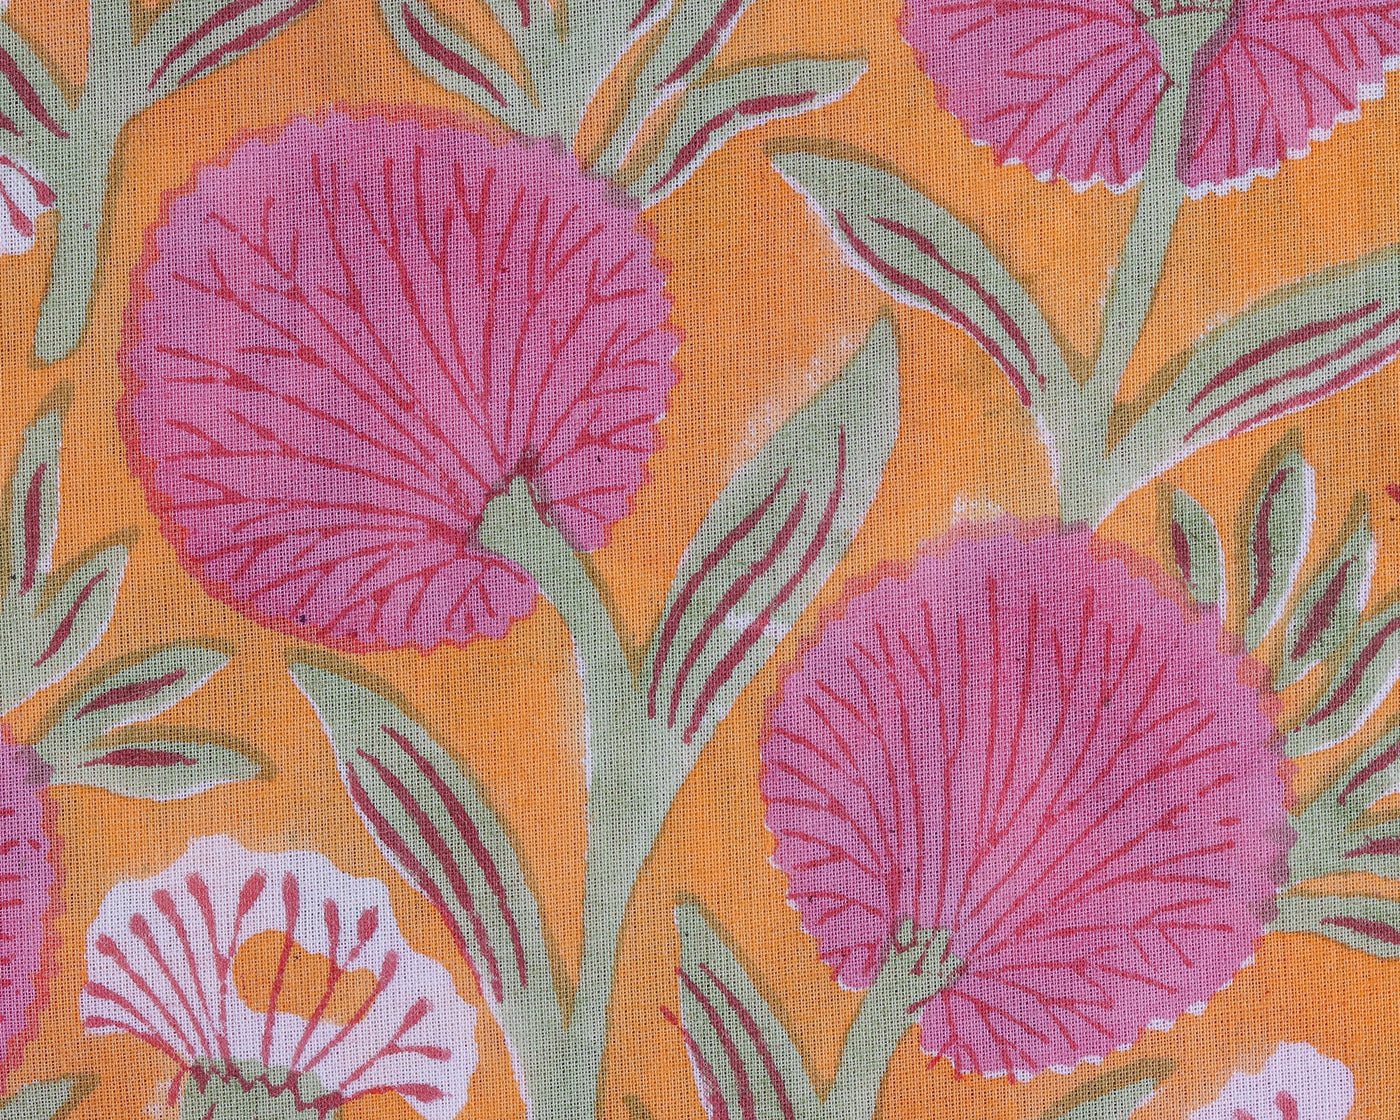 Tangerine Orange and Bubblegum Pink Indian Hand Block Printed 100% Pure Cotton Cloth, Fabric by the yard, Women's Clothing Curtains Pillows